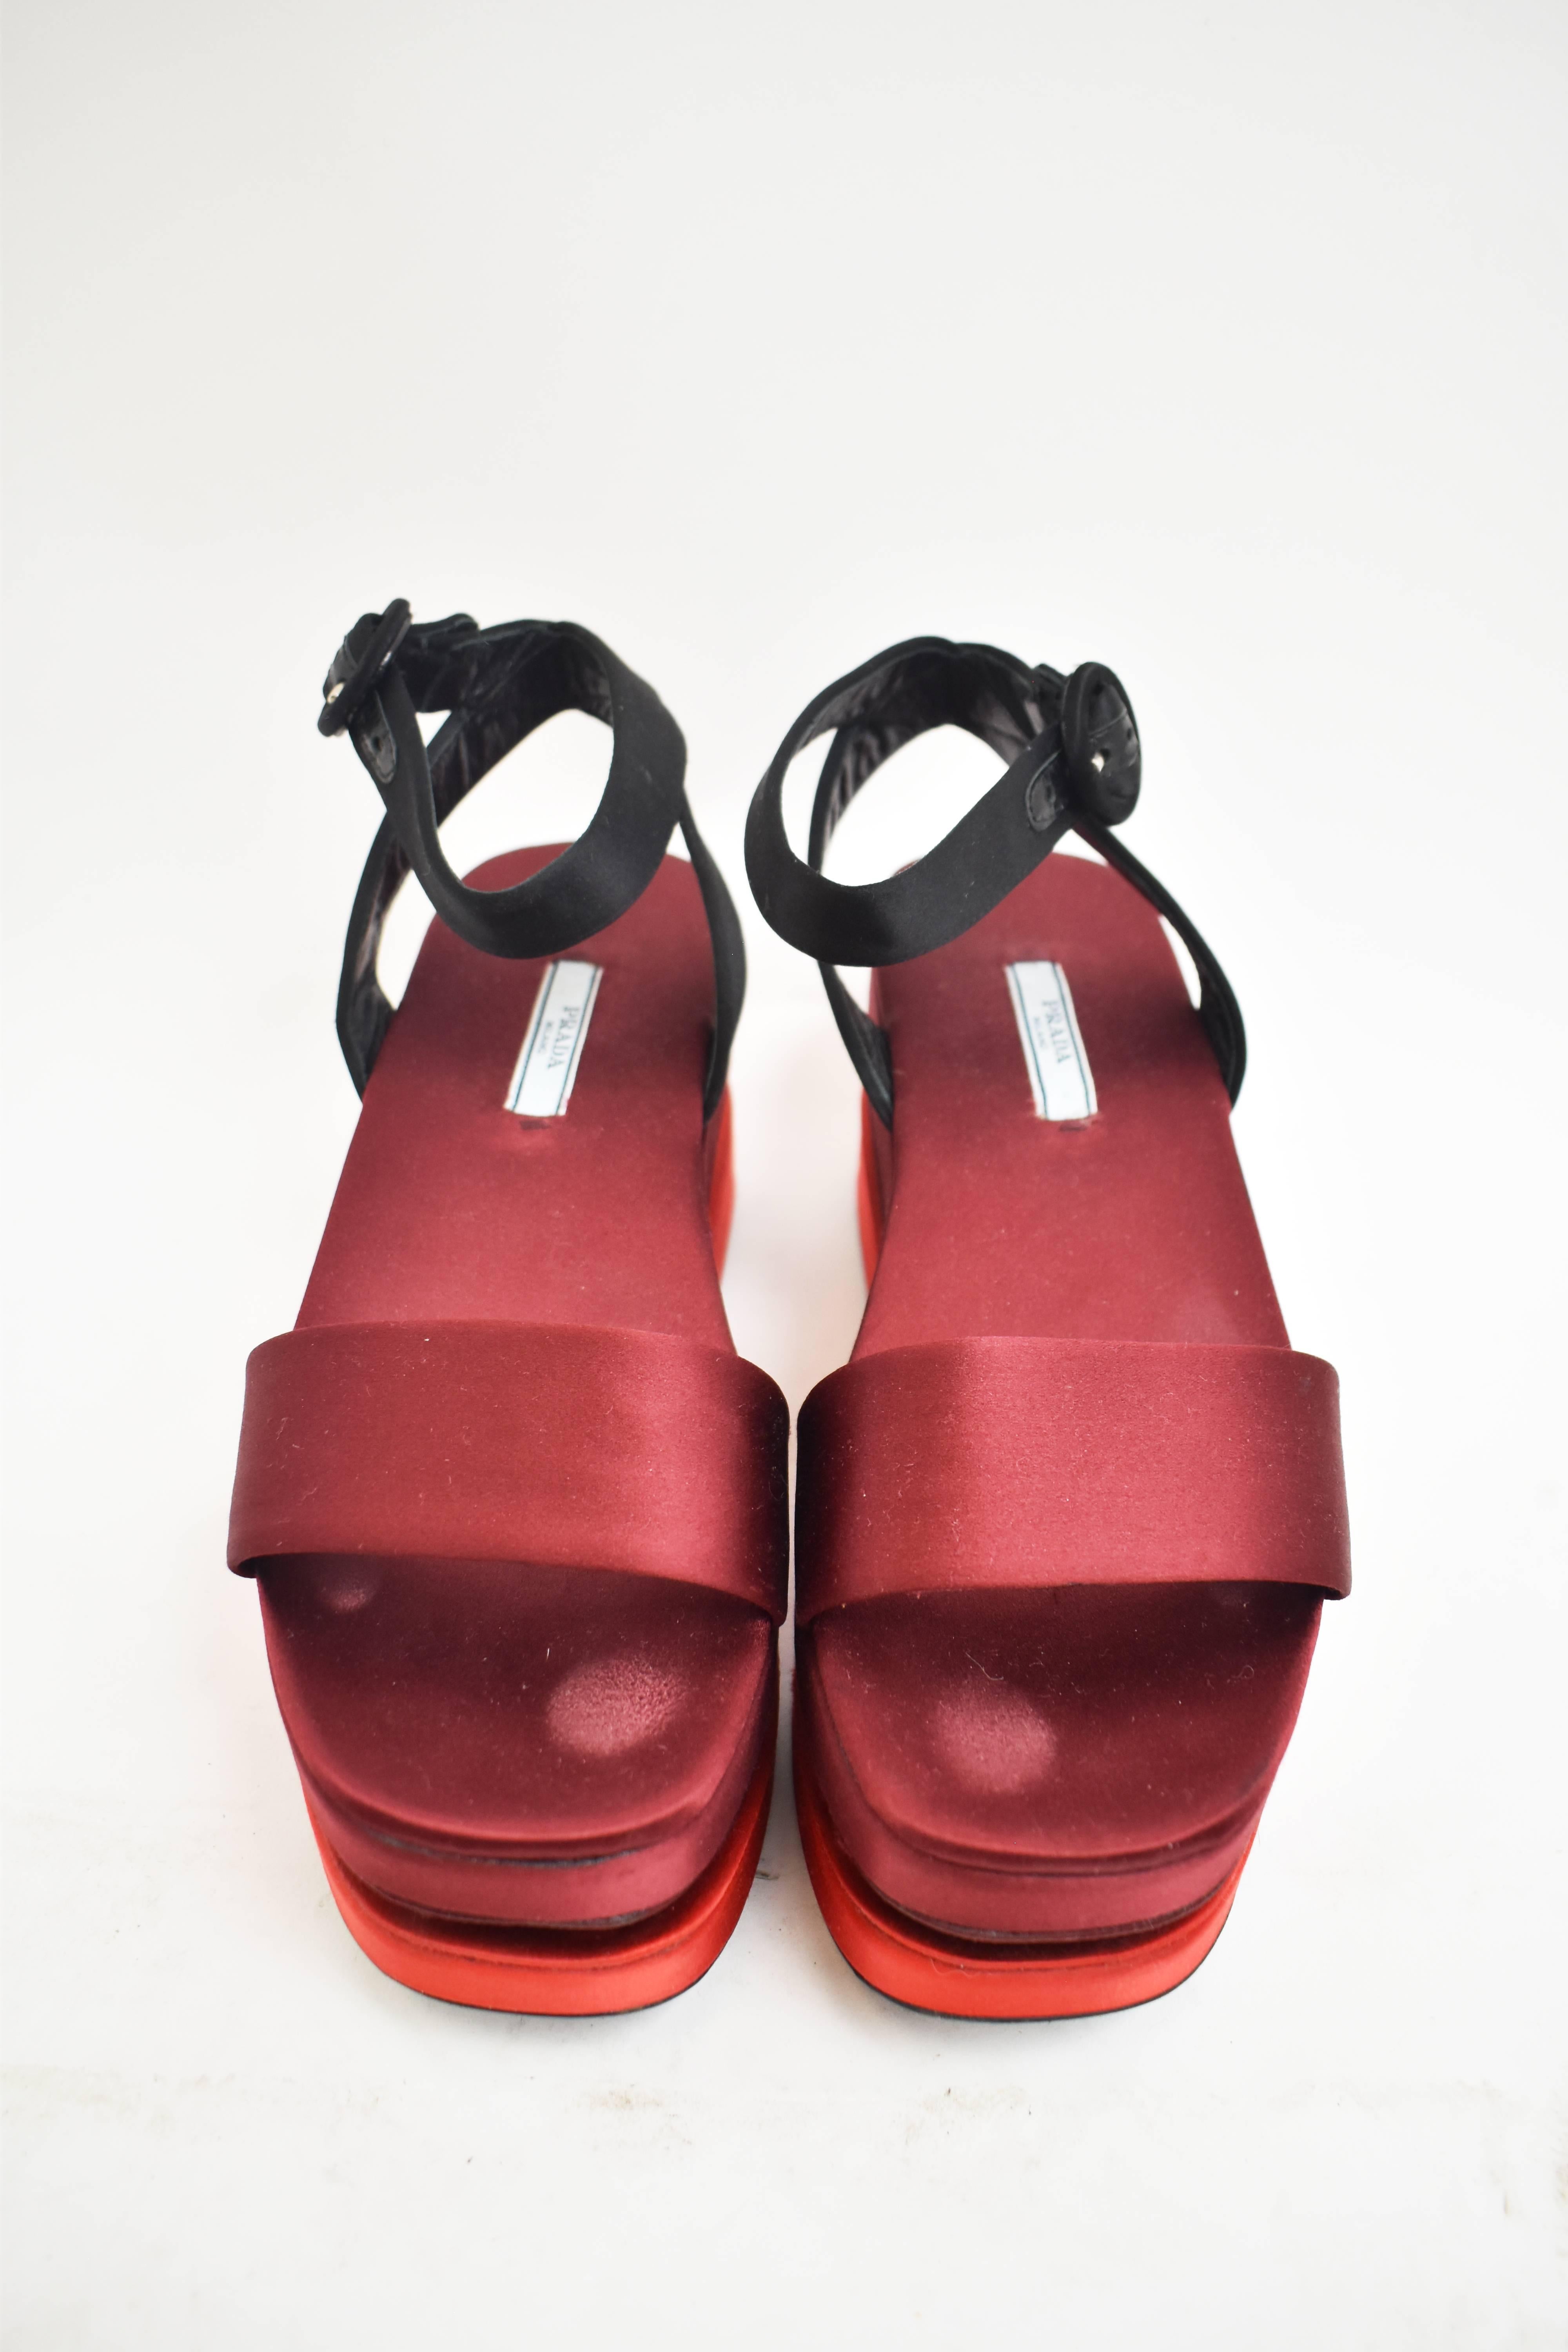 A pair of Prada sandals made from a dark red satin with contrast lighter red satin sole. The sandals have an interesting platform heel that is made from black lacquer wooden blocks that create the effect of a ‘floating’ sole. They have a single